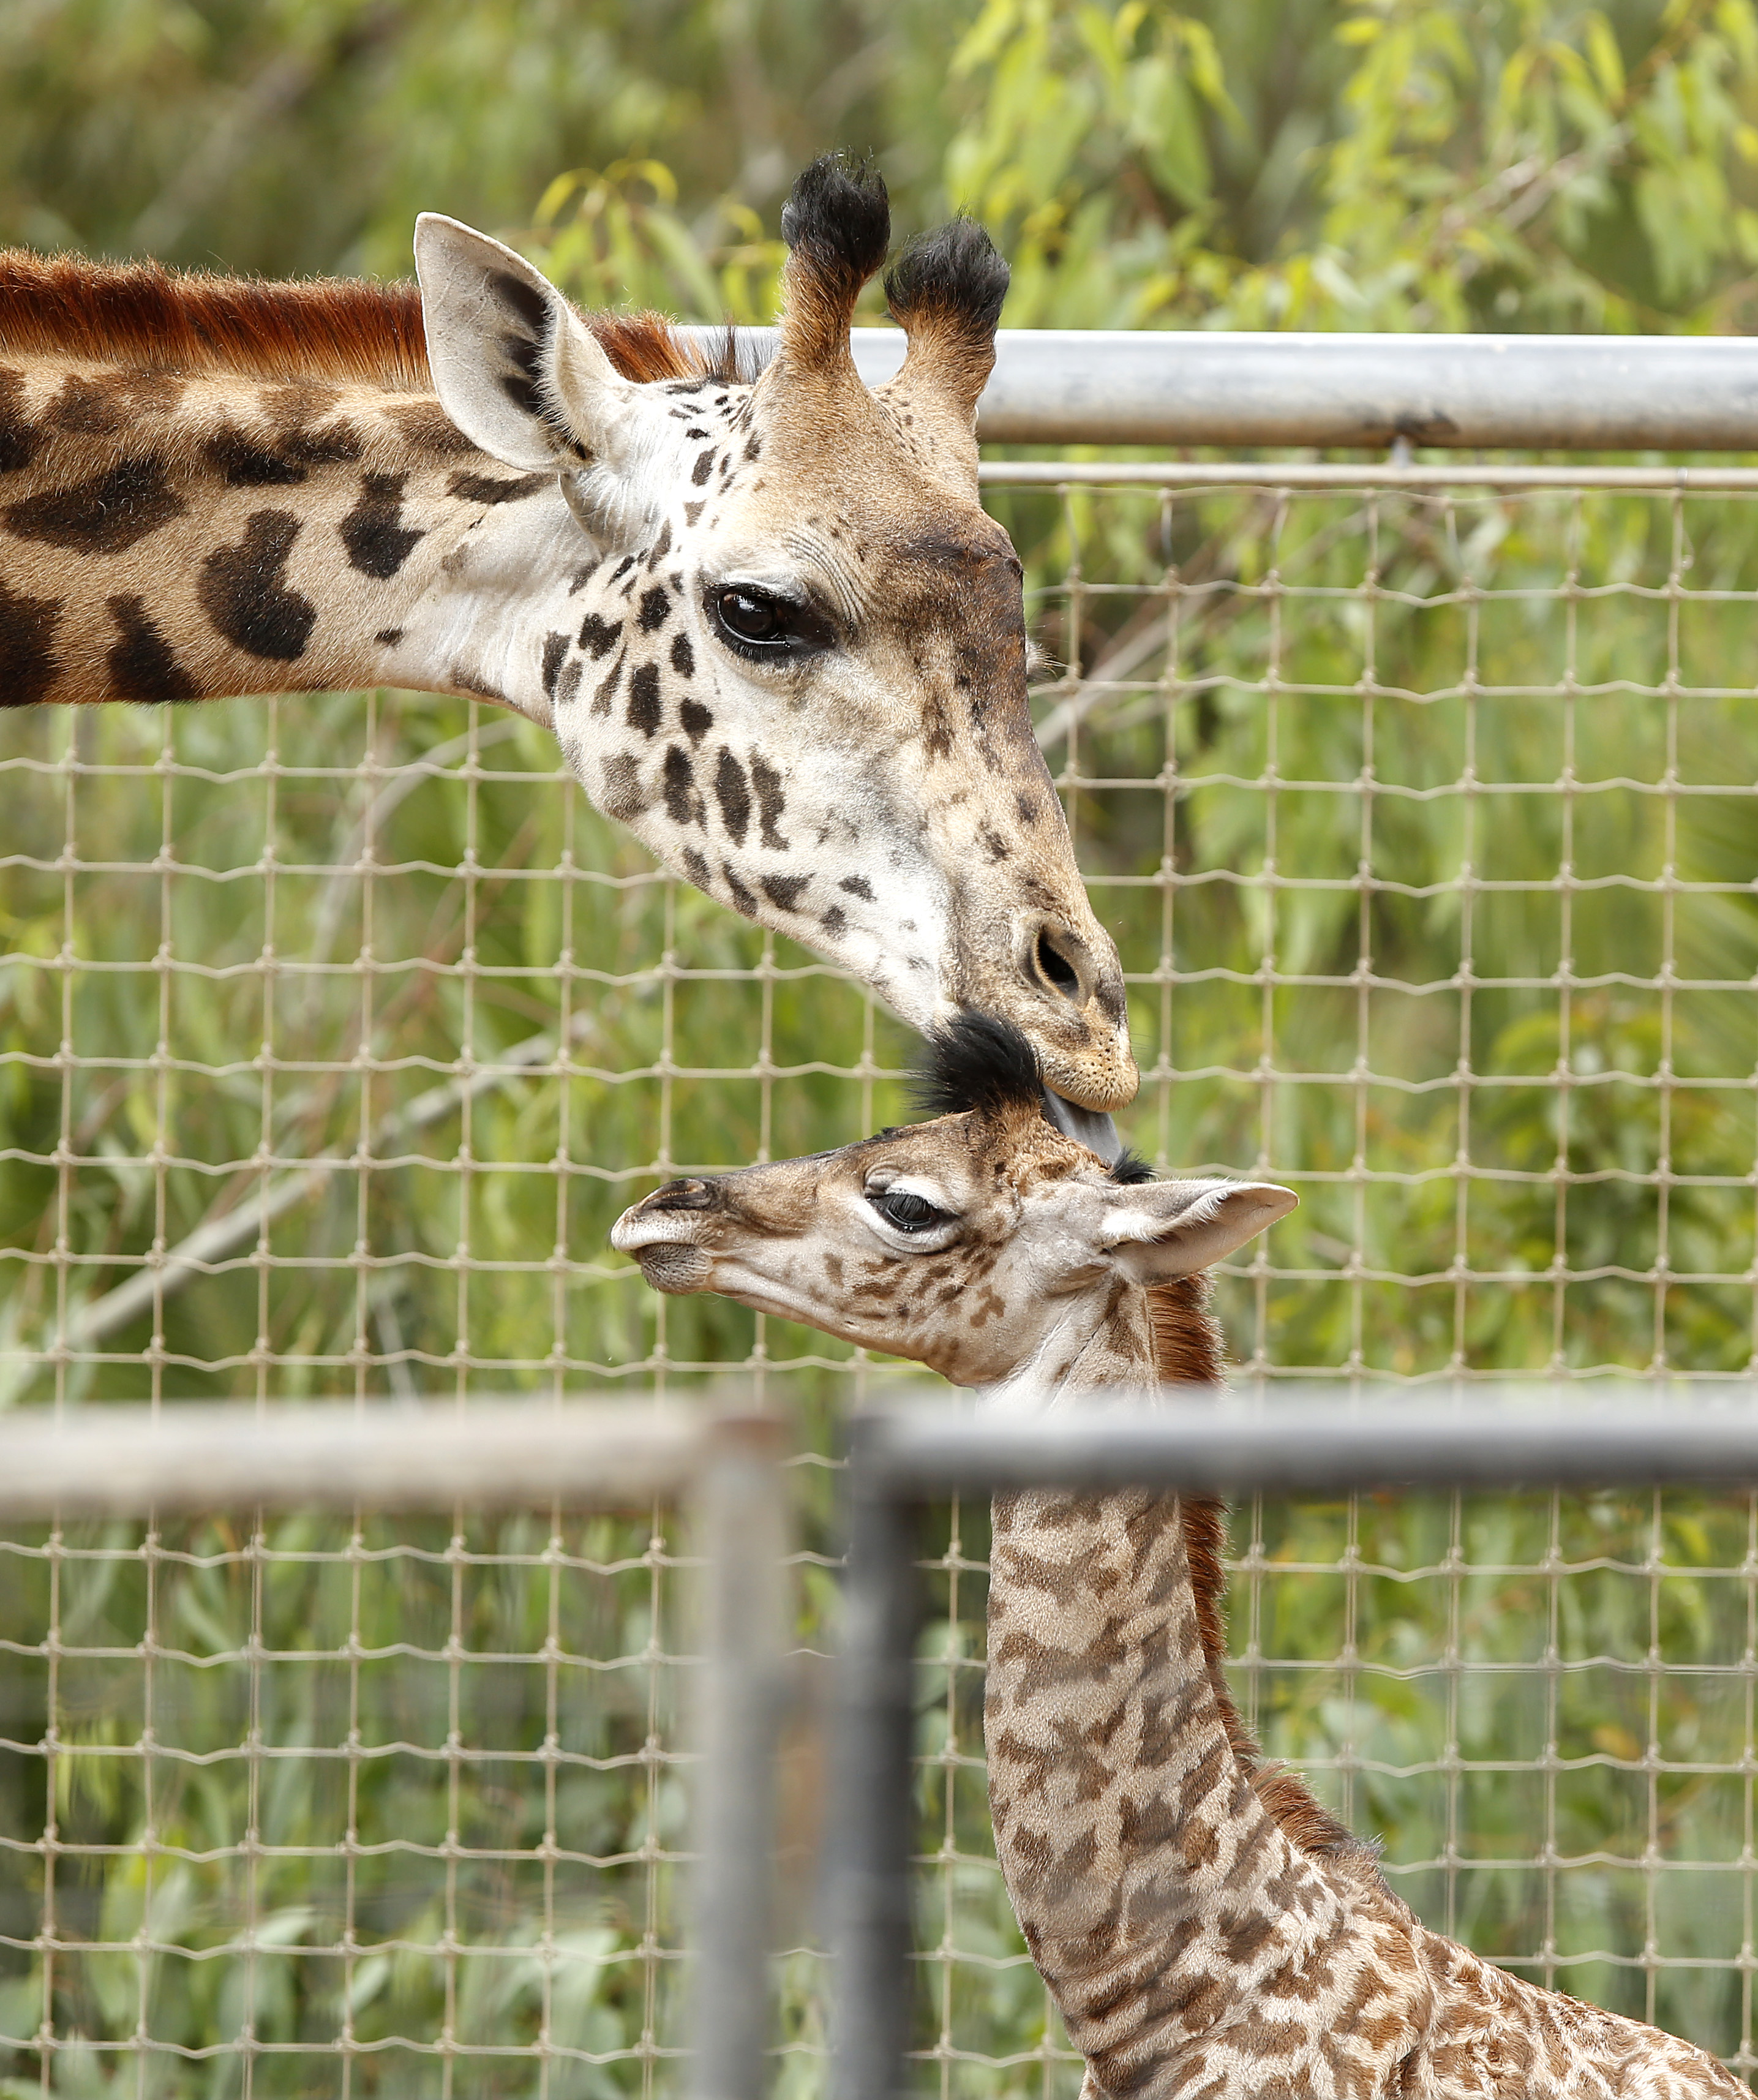 Another giraffe born at the San Diego Zoo -- this time it's a girl